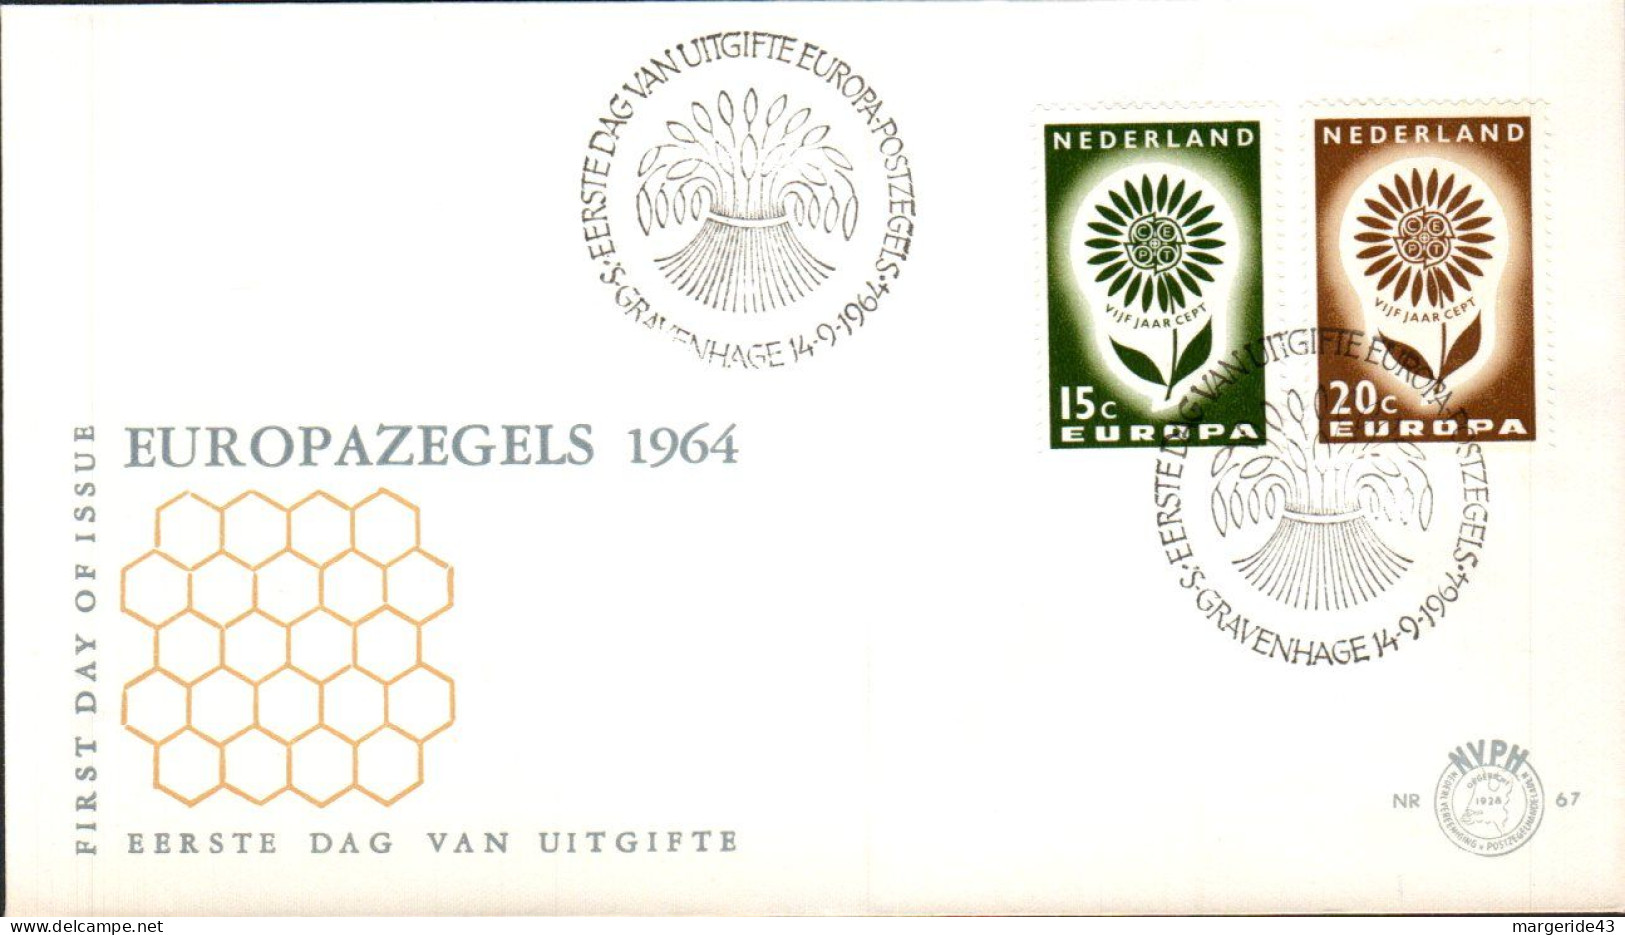 EUROPA 1964 PAYS BAS FDC - 1964